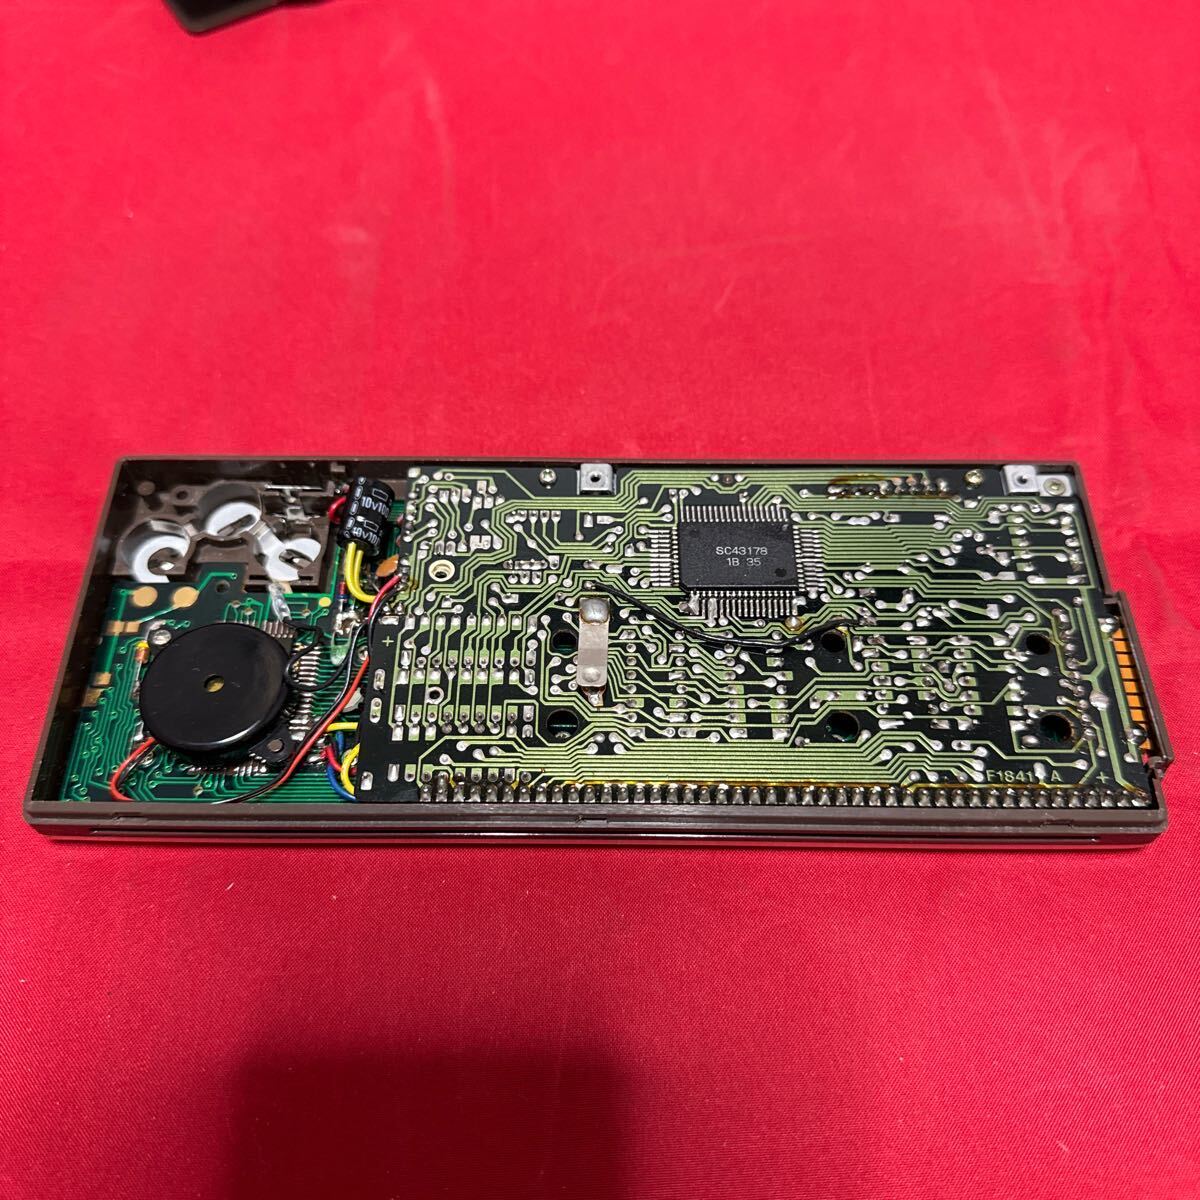 SHARP PC-1211 liquid crystal replaced simple operation verification ending 